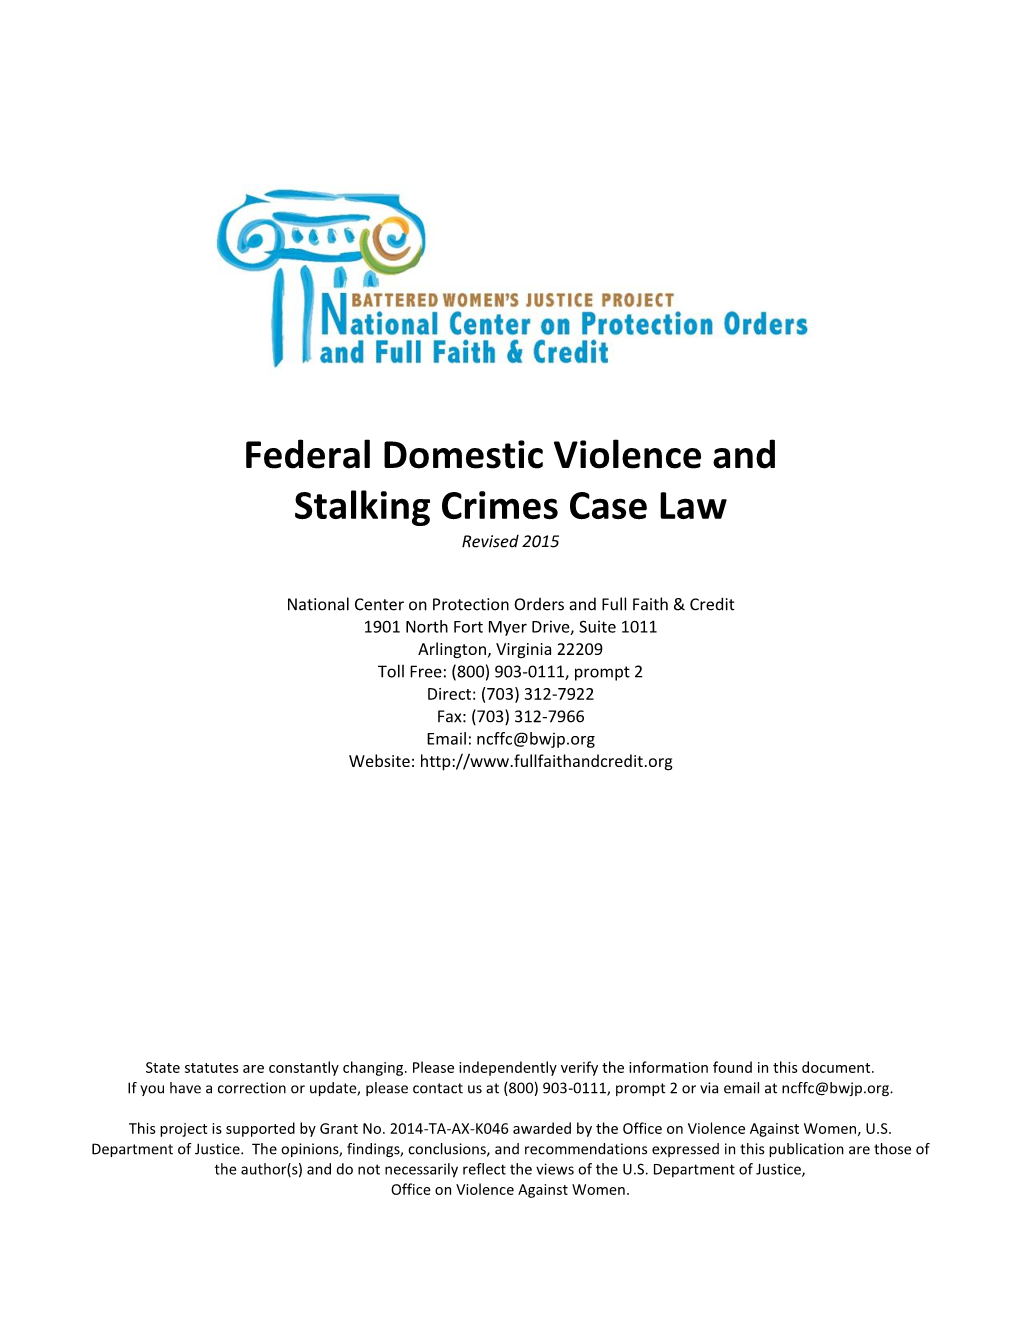 Federal Domestic Violence and Stalking Crimes Case Law Revised 2015